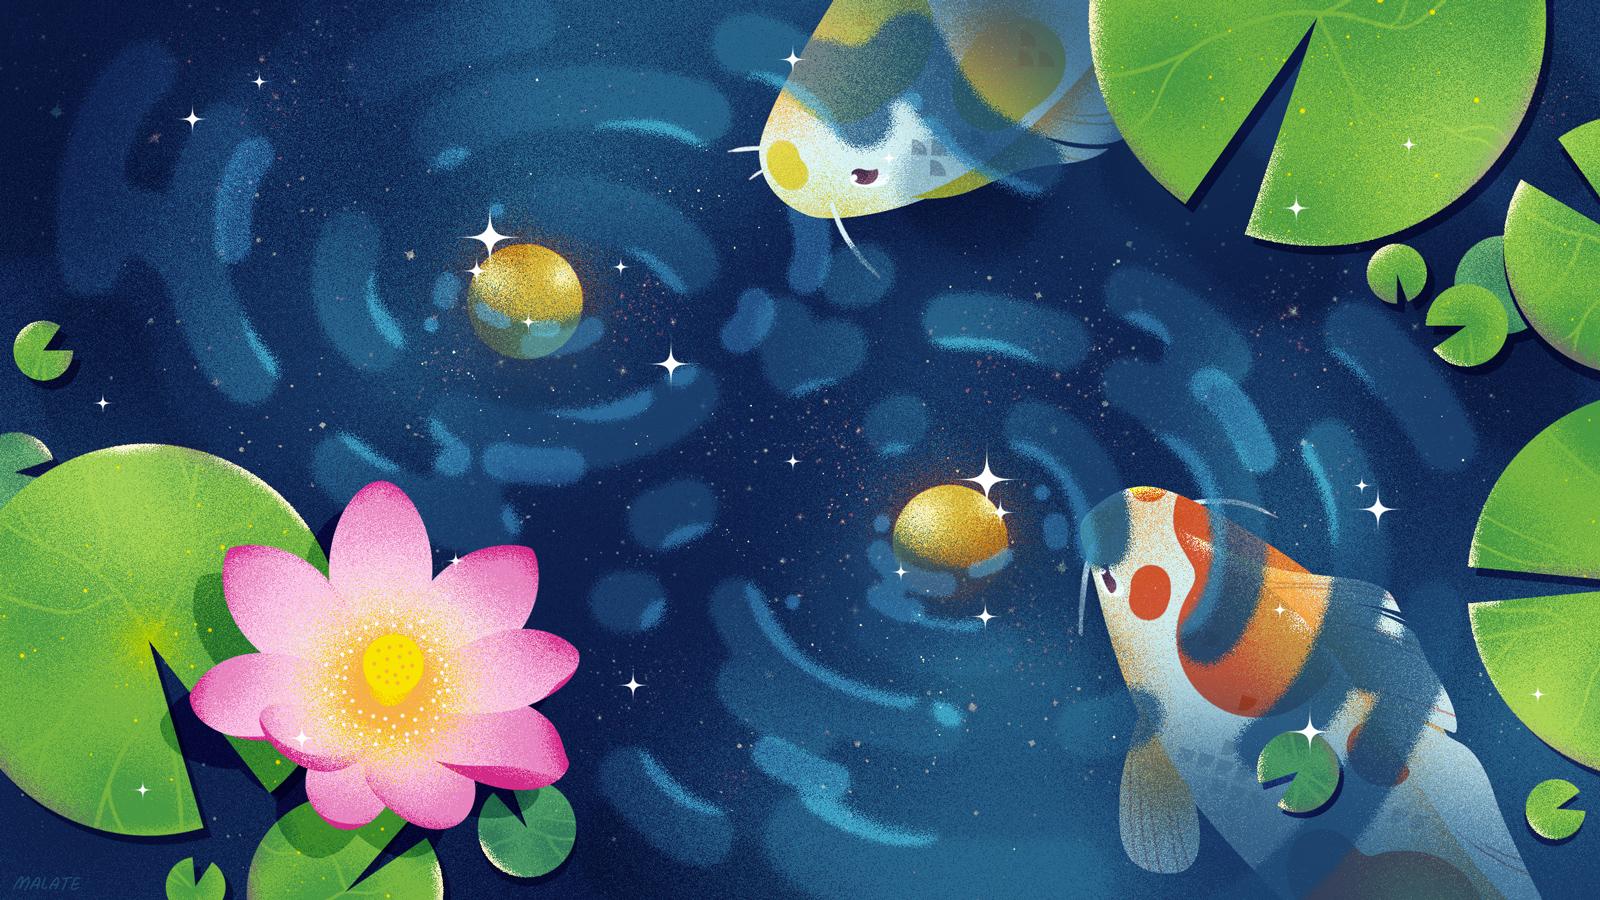 Illustration of two atoms in a koi pond